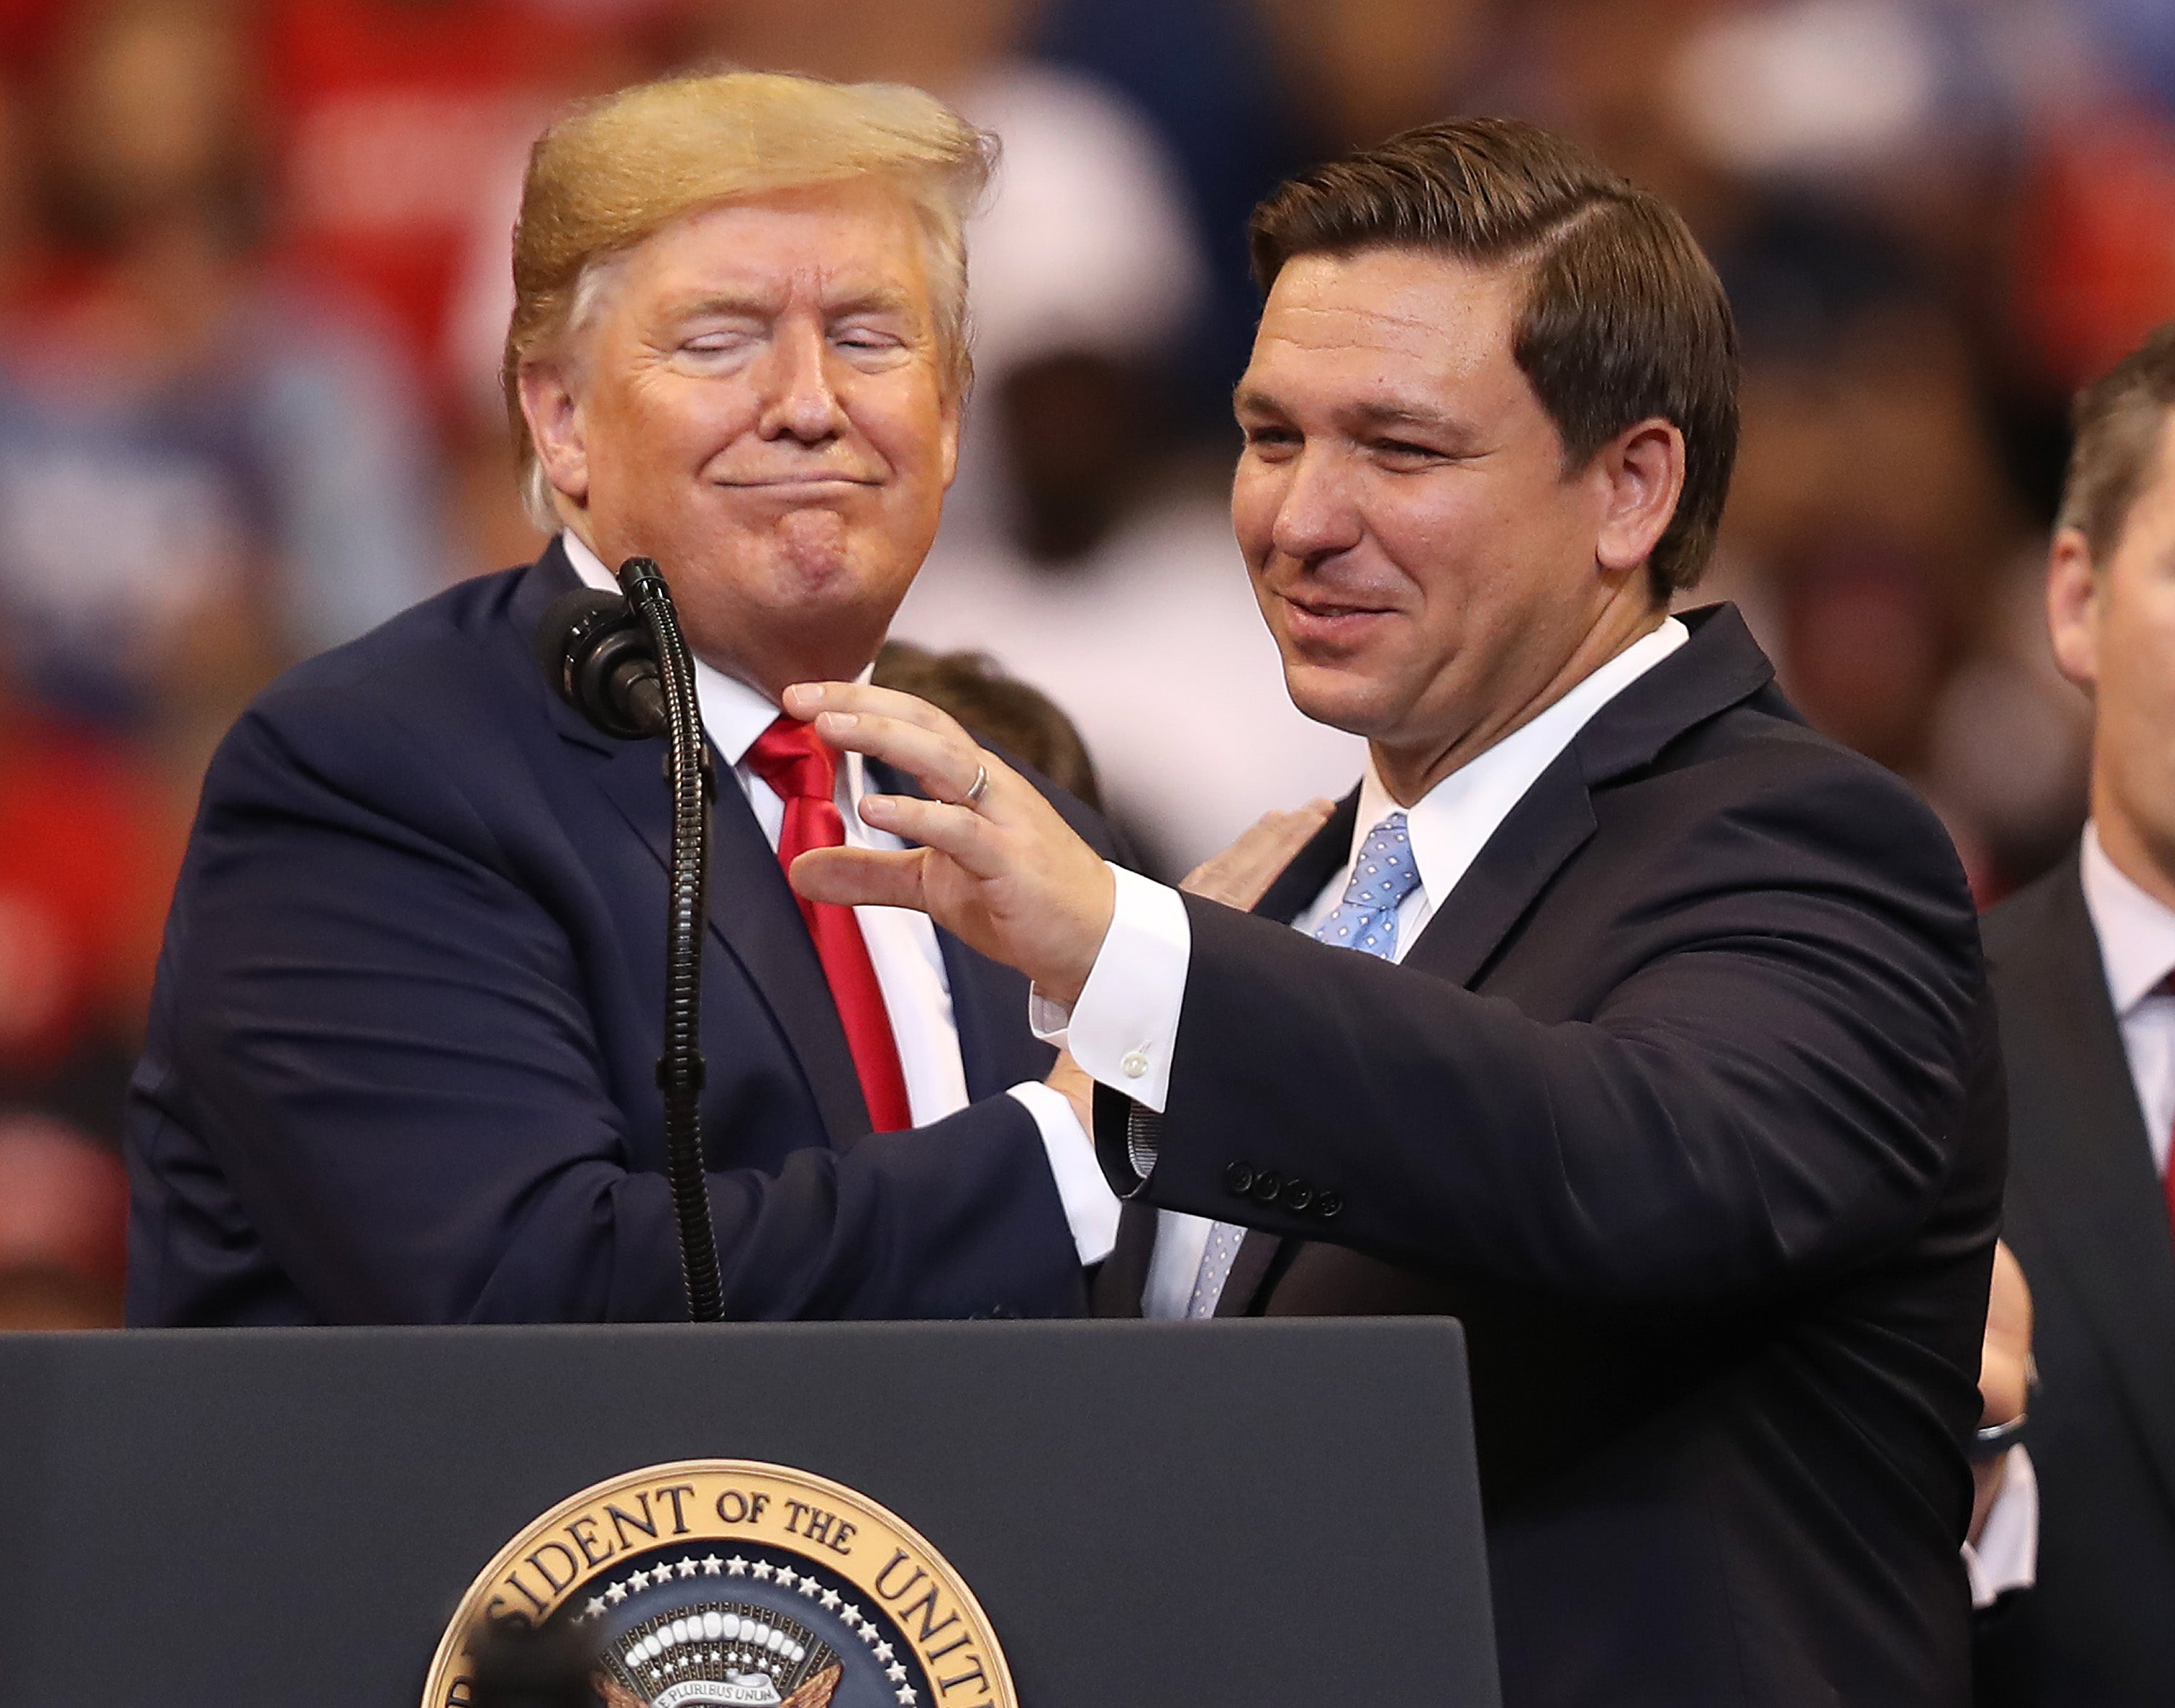 U.S. President Donald Trump introduces Florida Governor Ron DeSantis during a homecoming campaign rally at the BB&T Center on November 26, 2019 in Sunrise, Florida